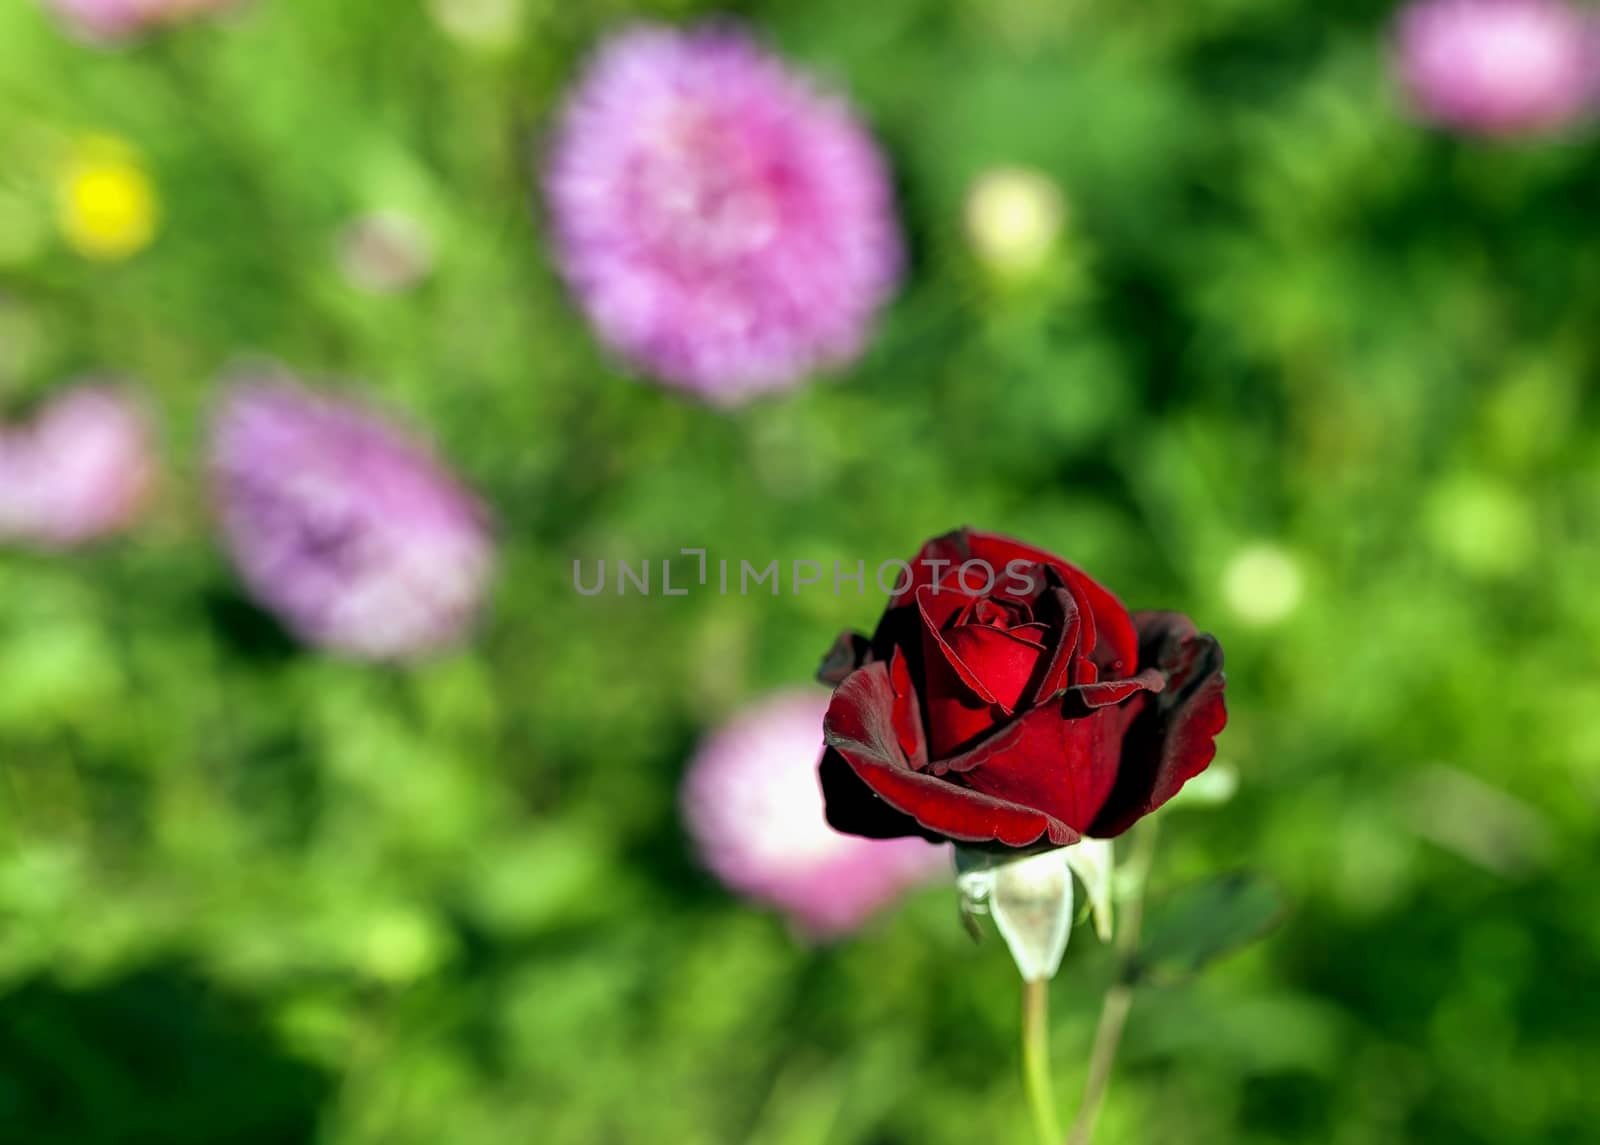 red rose on the background of natural greenery, soft focus by valerypetr